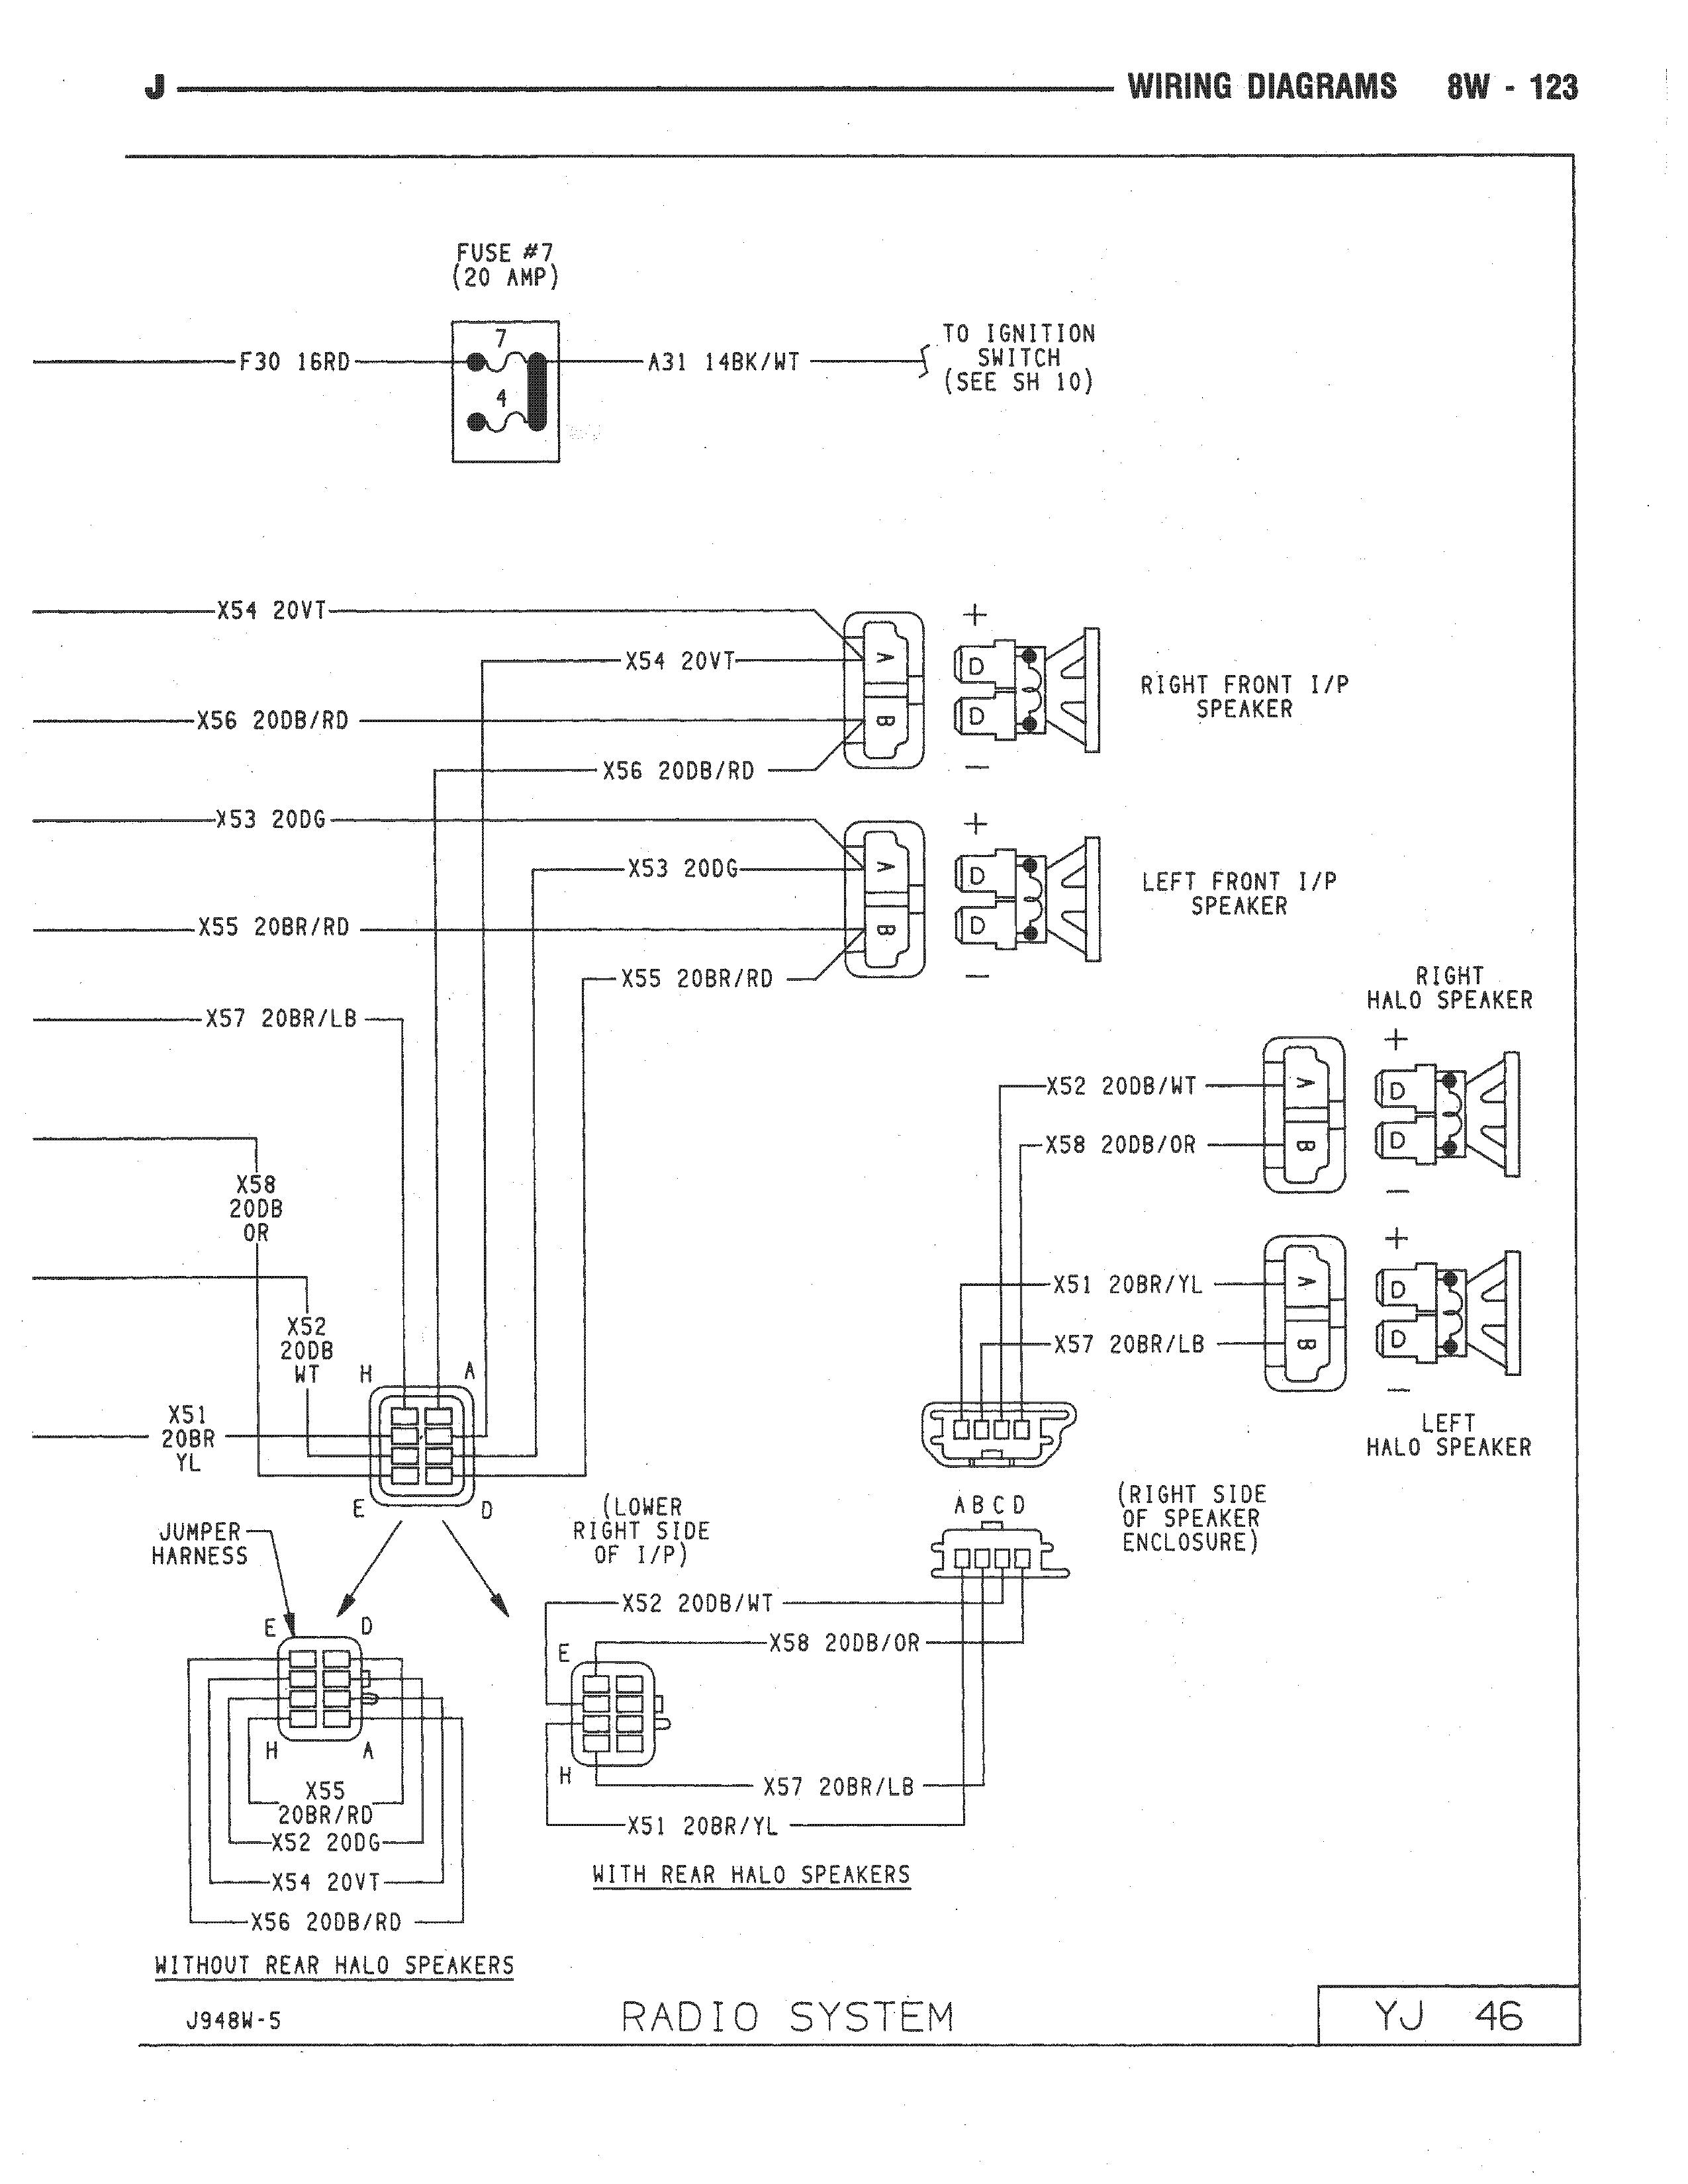 2002 jeep wrangler stereo wiring wiring diagram datasource jeep liberty radio wiring diagram 2002 jeep wrangler